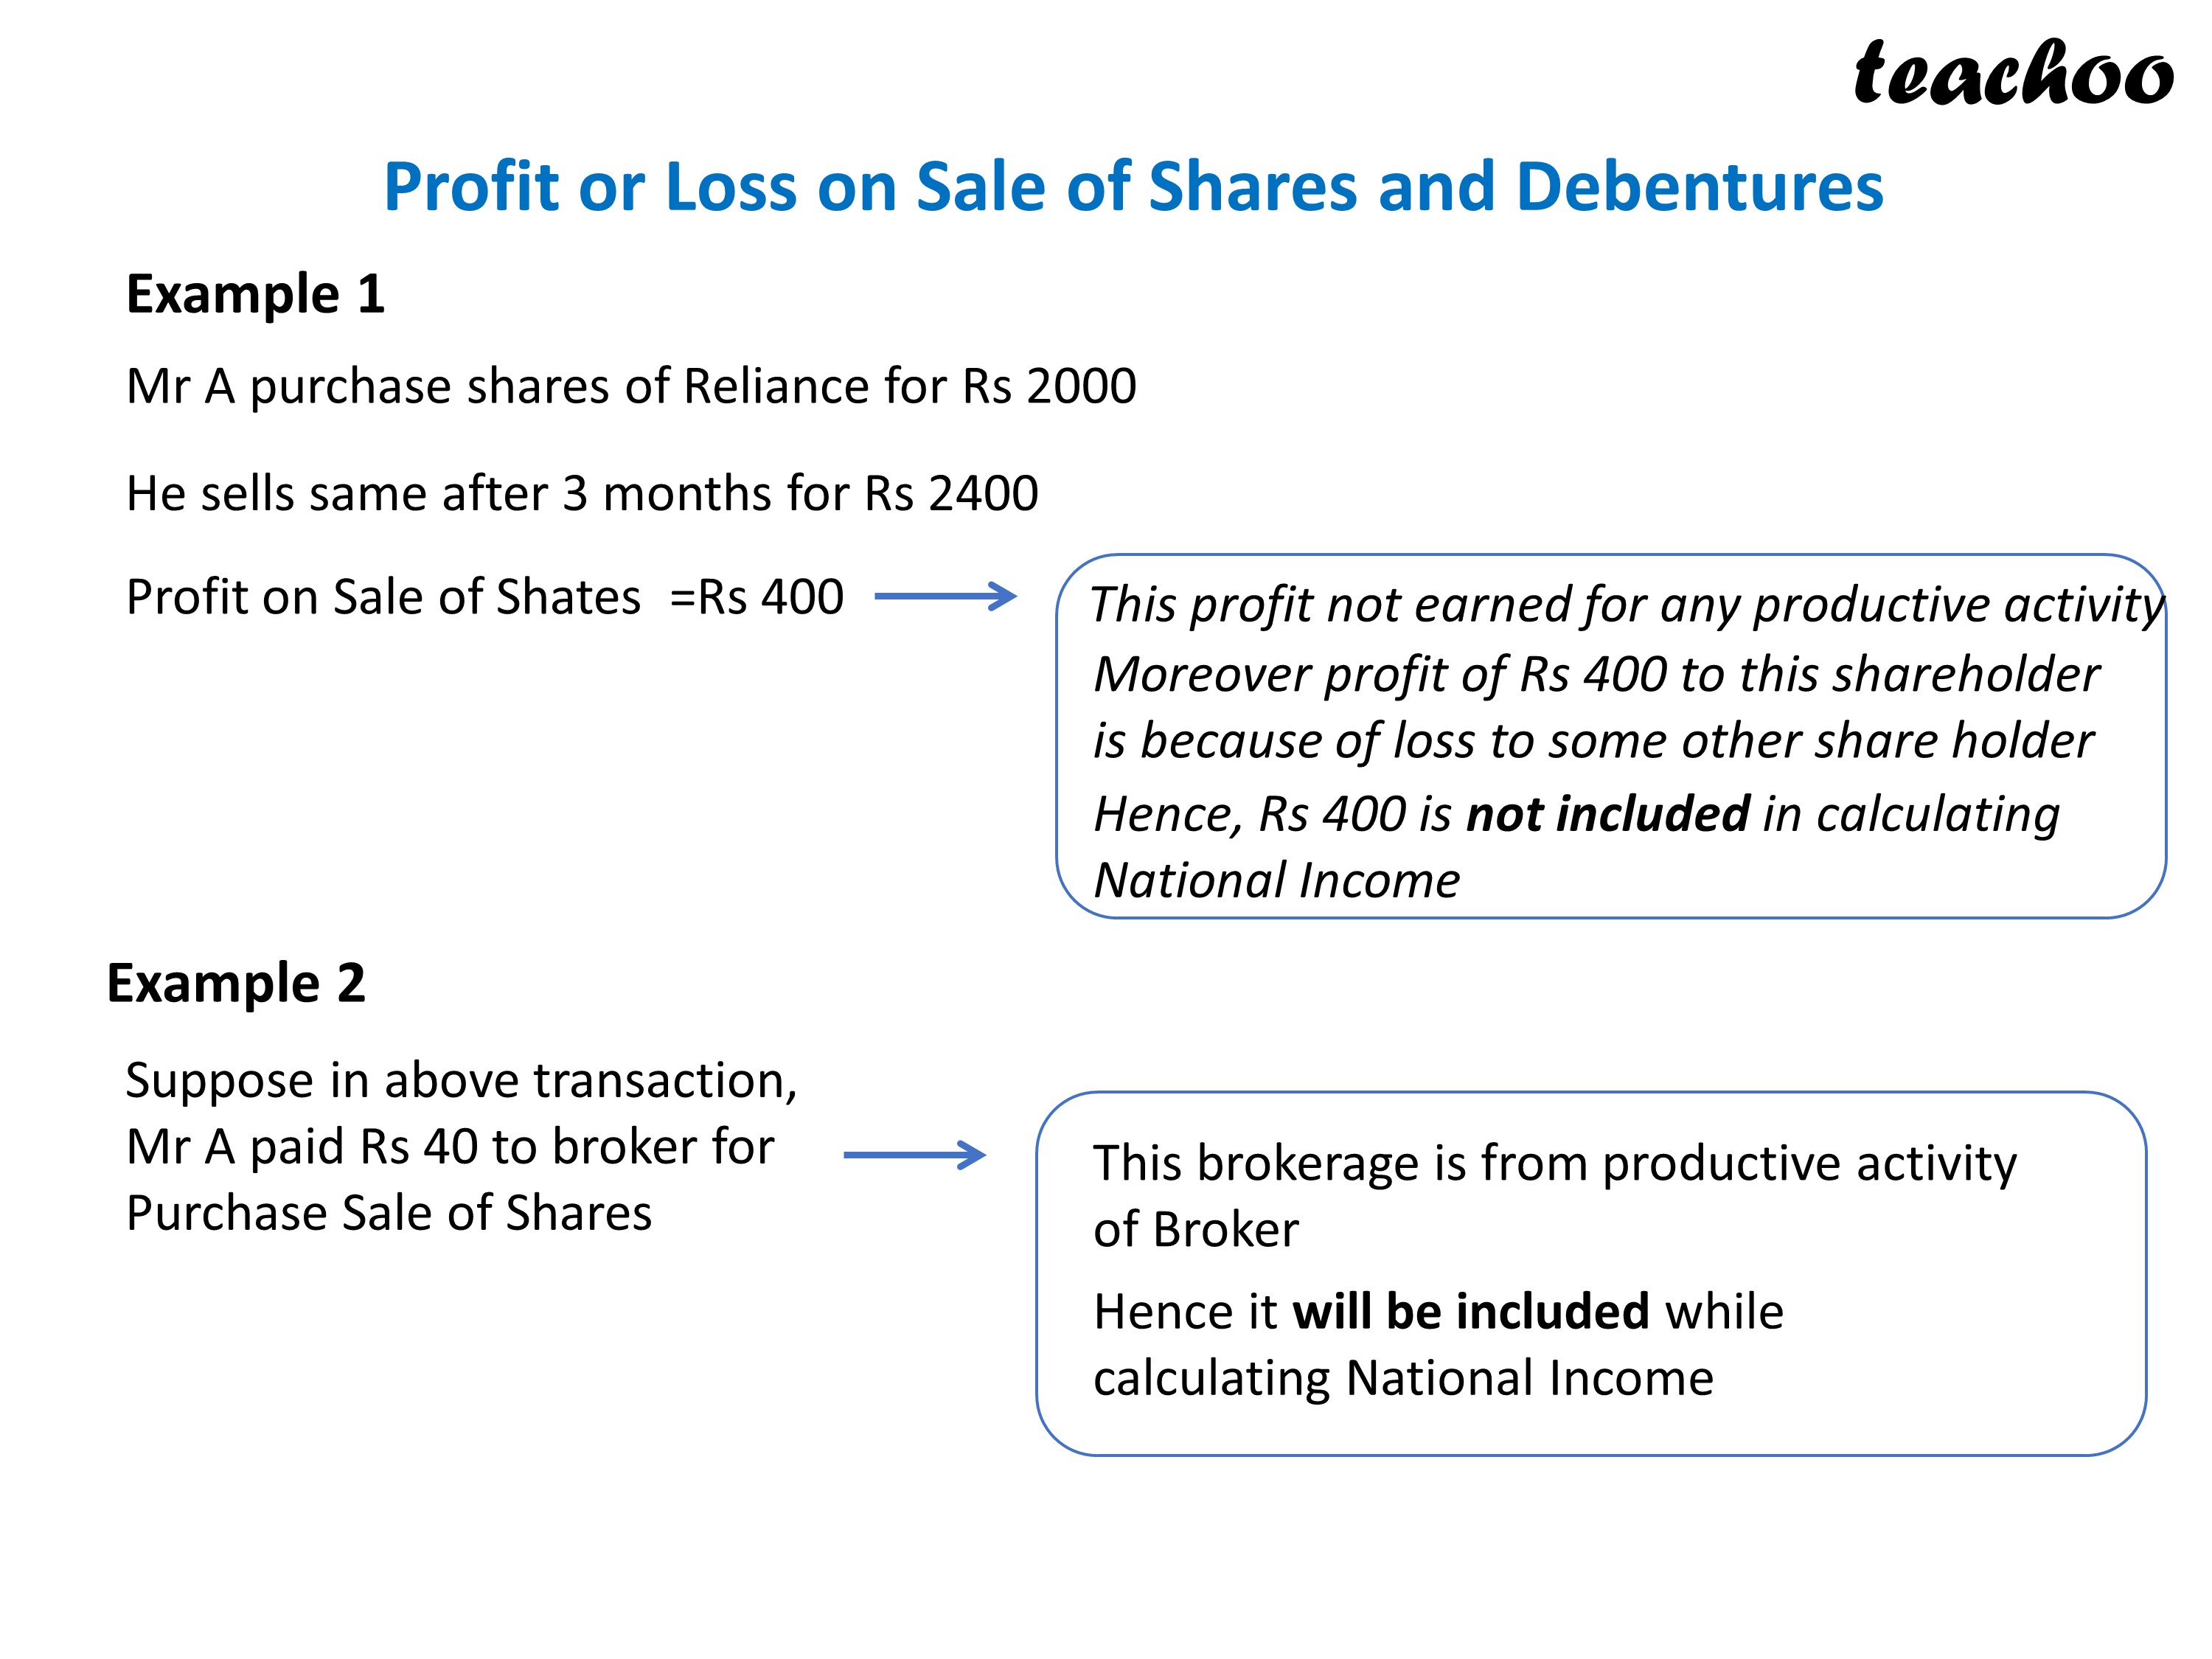 Profit or Loss on Sale of Shares and Debentures.JPG